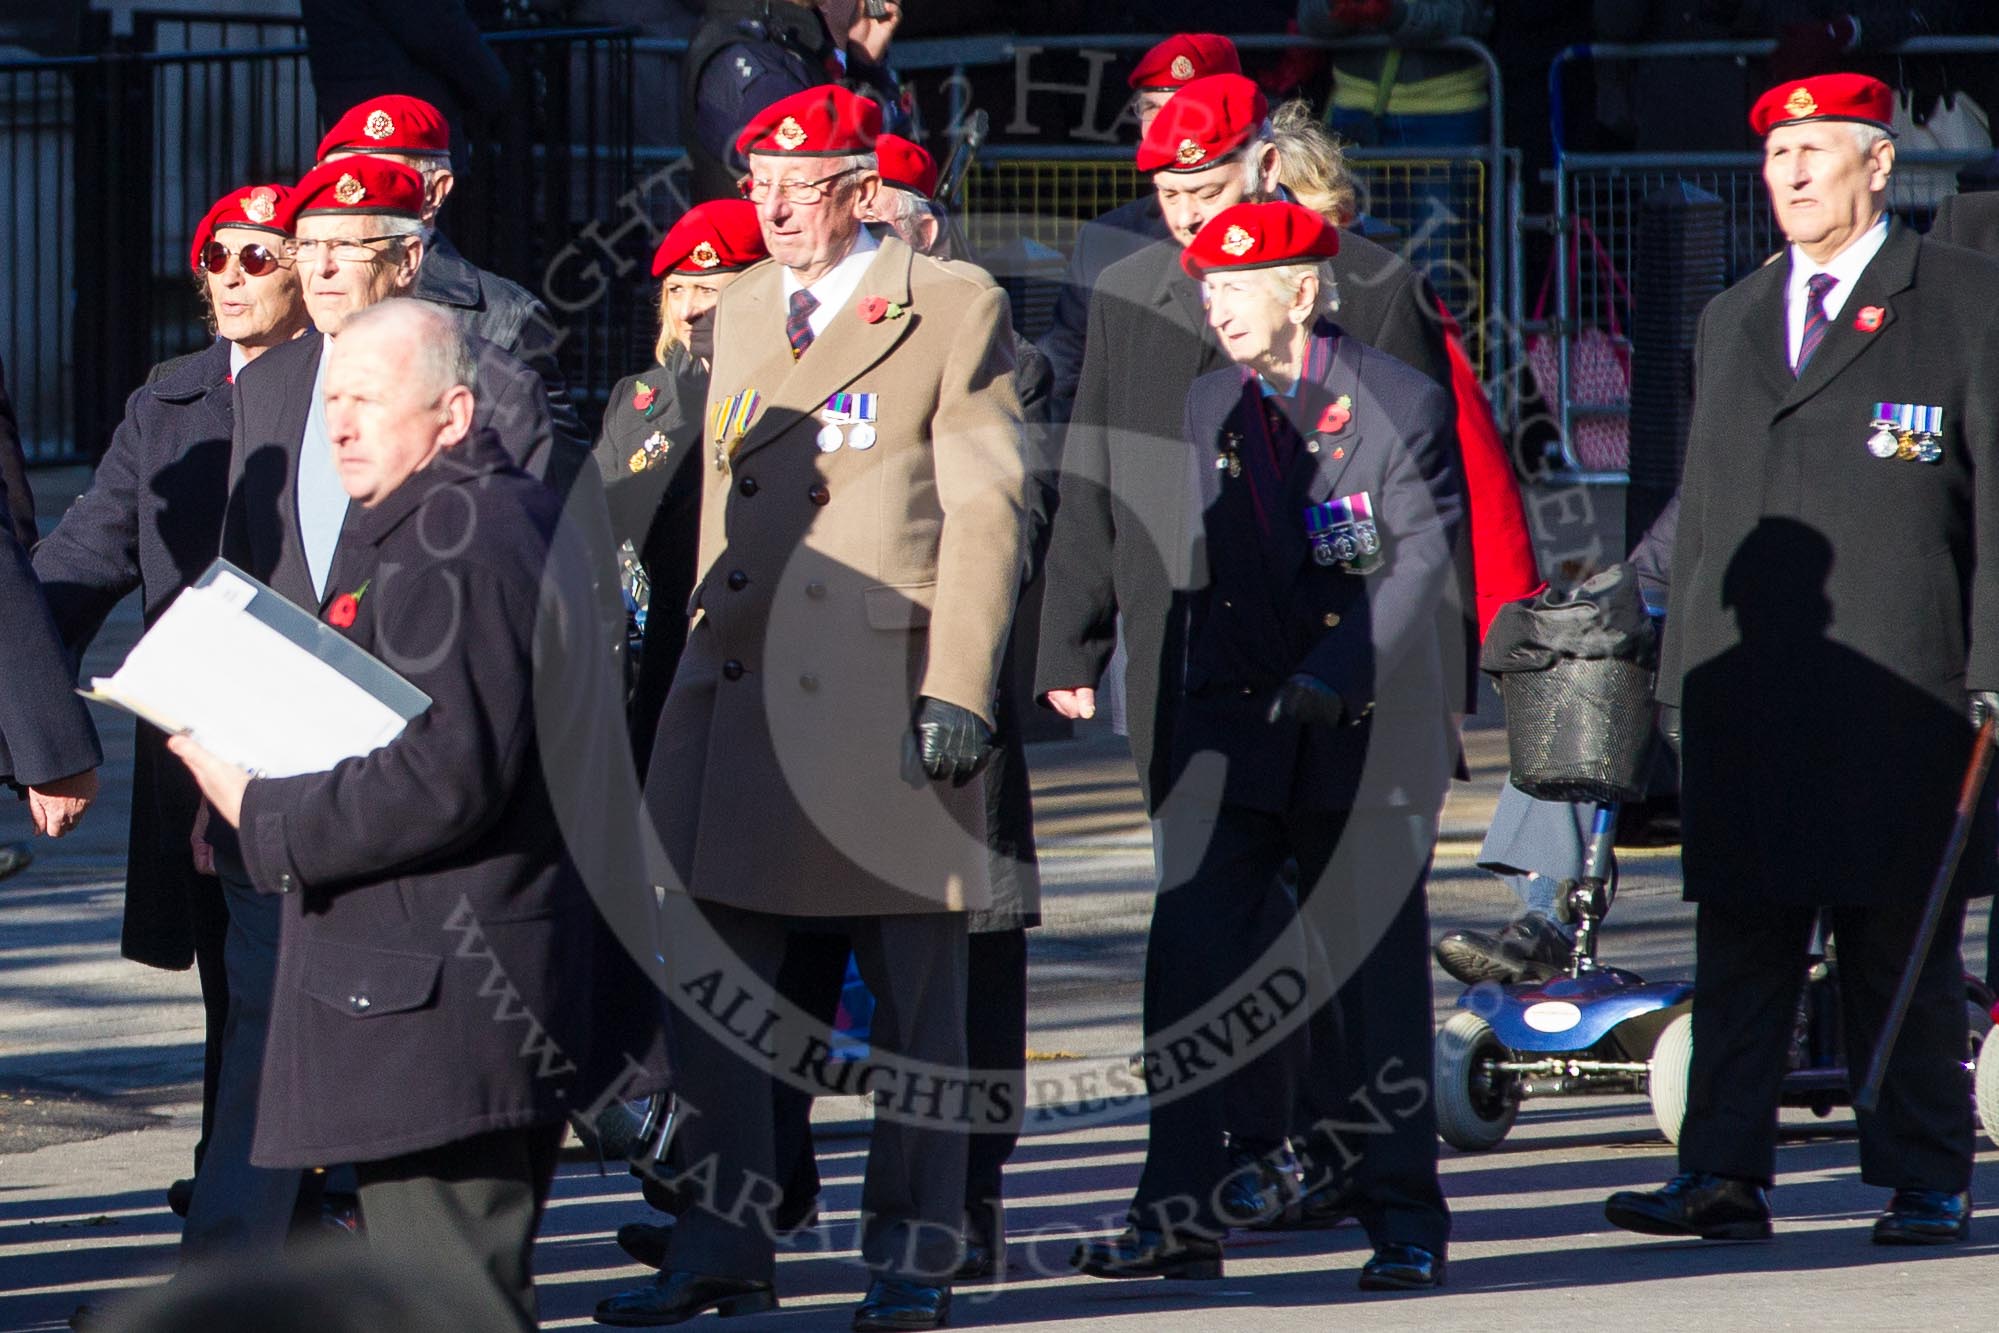 Remembrance Sunday 2012 Cenotaph March Past: Group B3, Royal Military Police Association..
Whitehall, Cenotaph,
London SW1,

United Kingdom,
on 11 November 2012 at 11:55, image #822